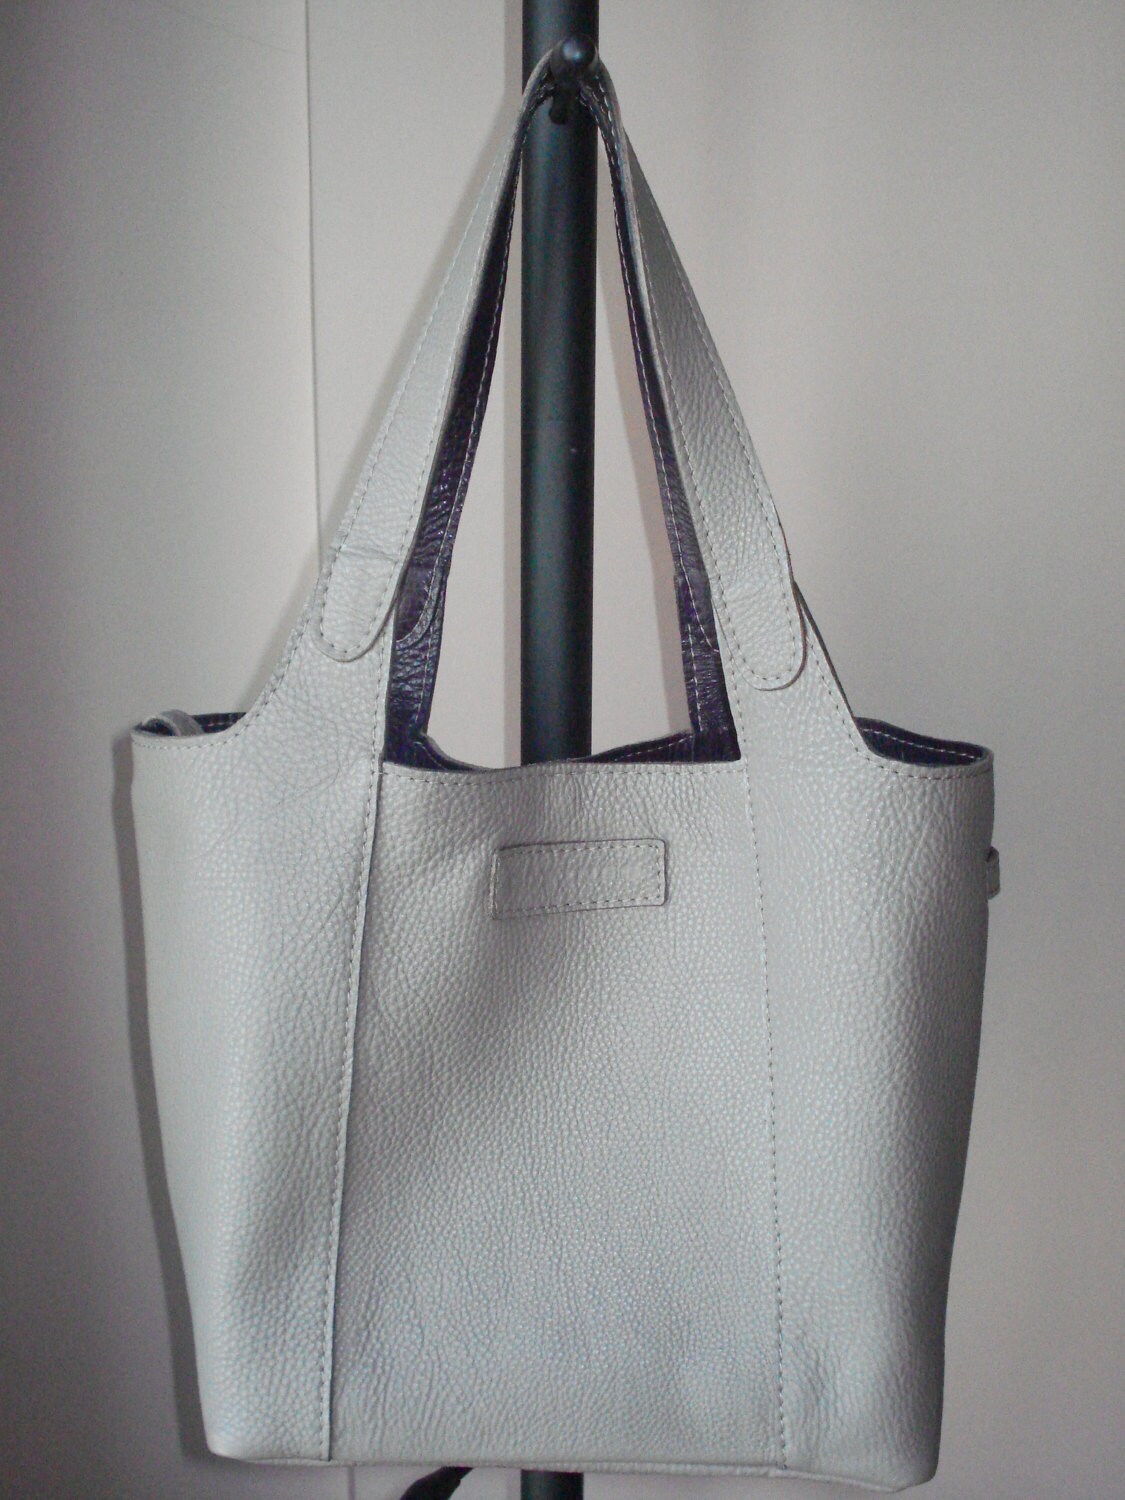 Leather Bag Grey Color Leather Tote Bag Large CarryAll